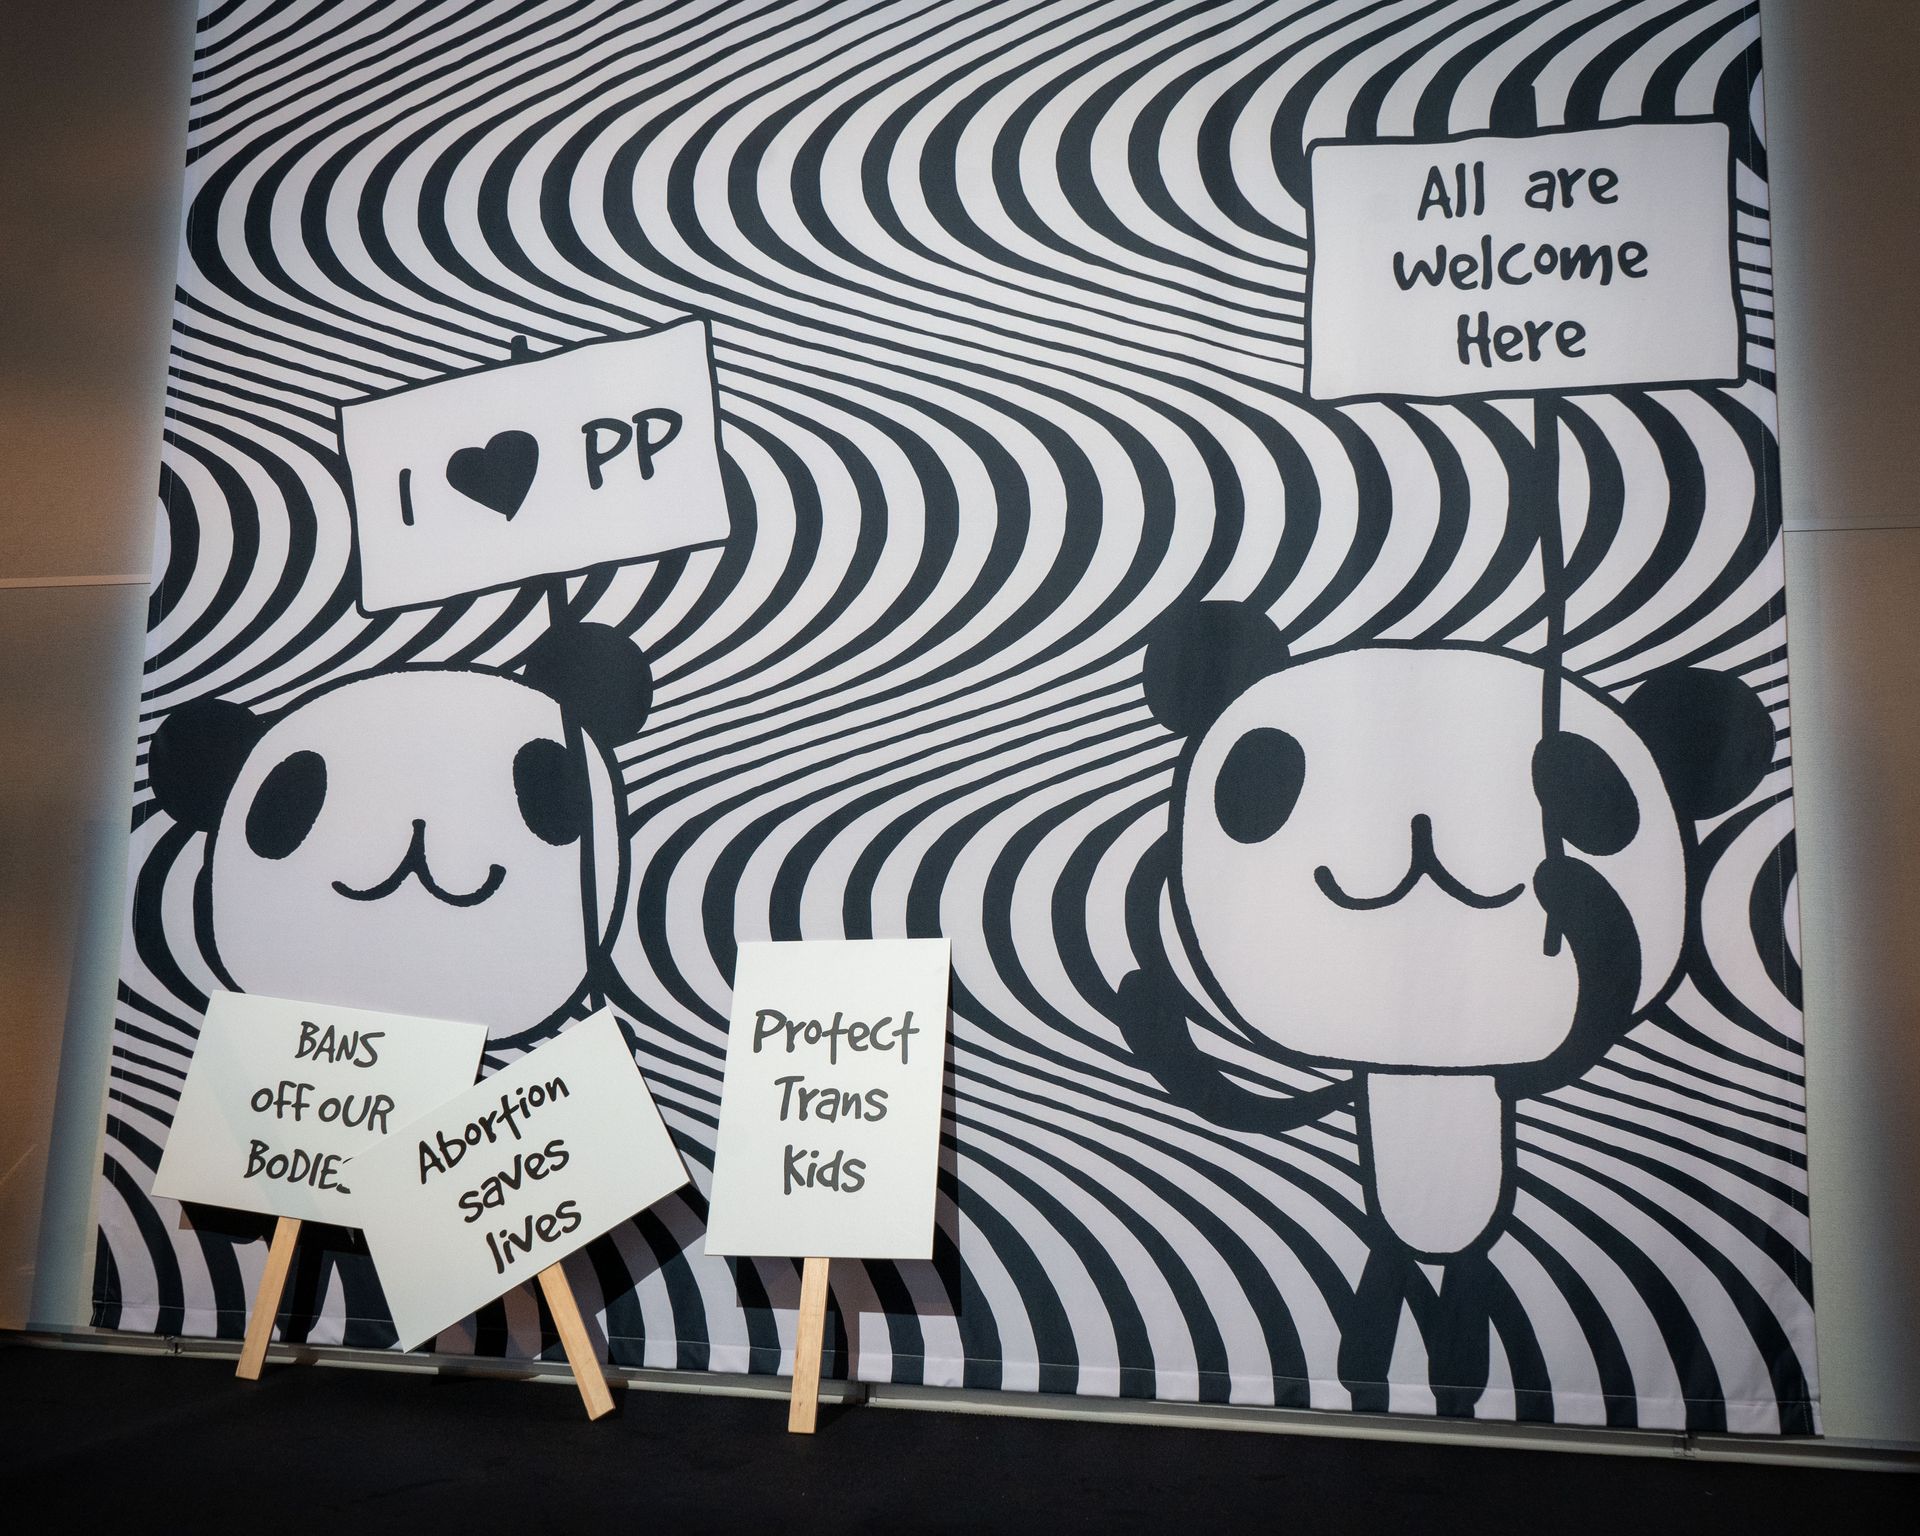 Planned Parenthood Event at The Glasshouse - photo of two pandas holding signs in front of a wall that says all are welcome here